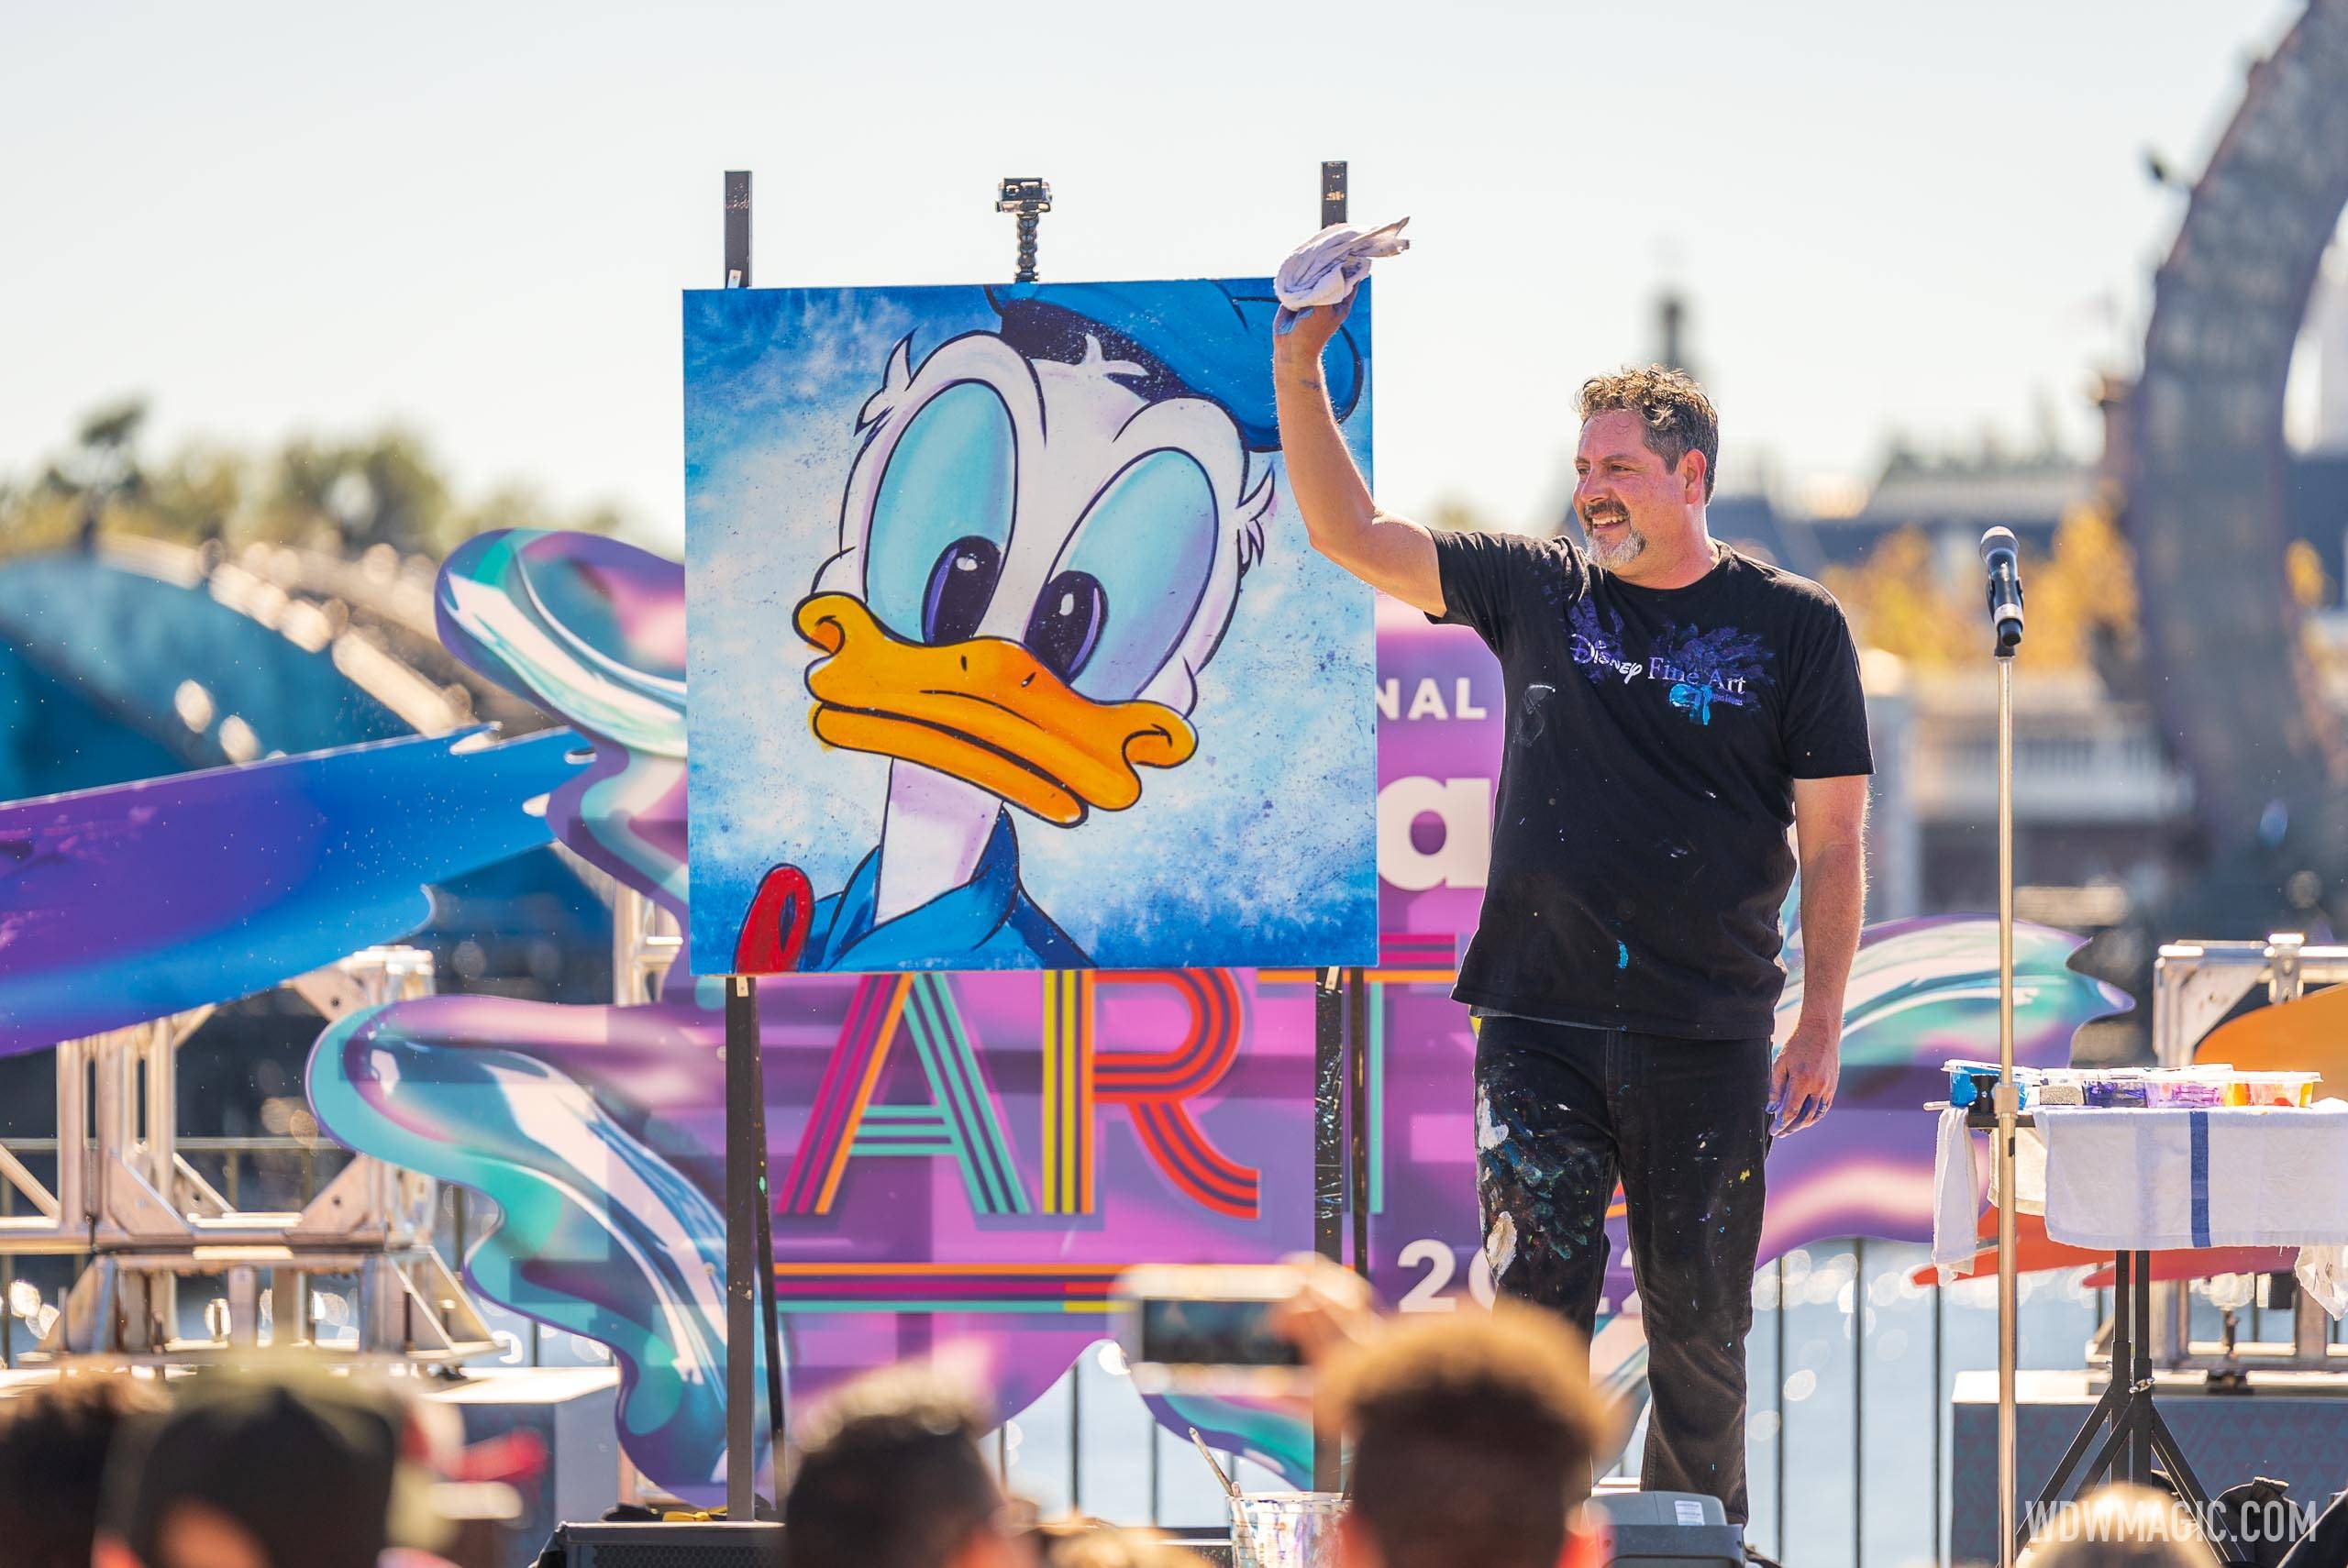 First details announced for the 2023 EPCOT International Festival of the Arts